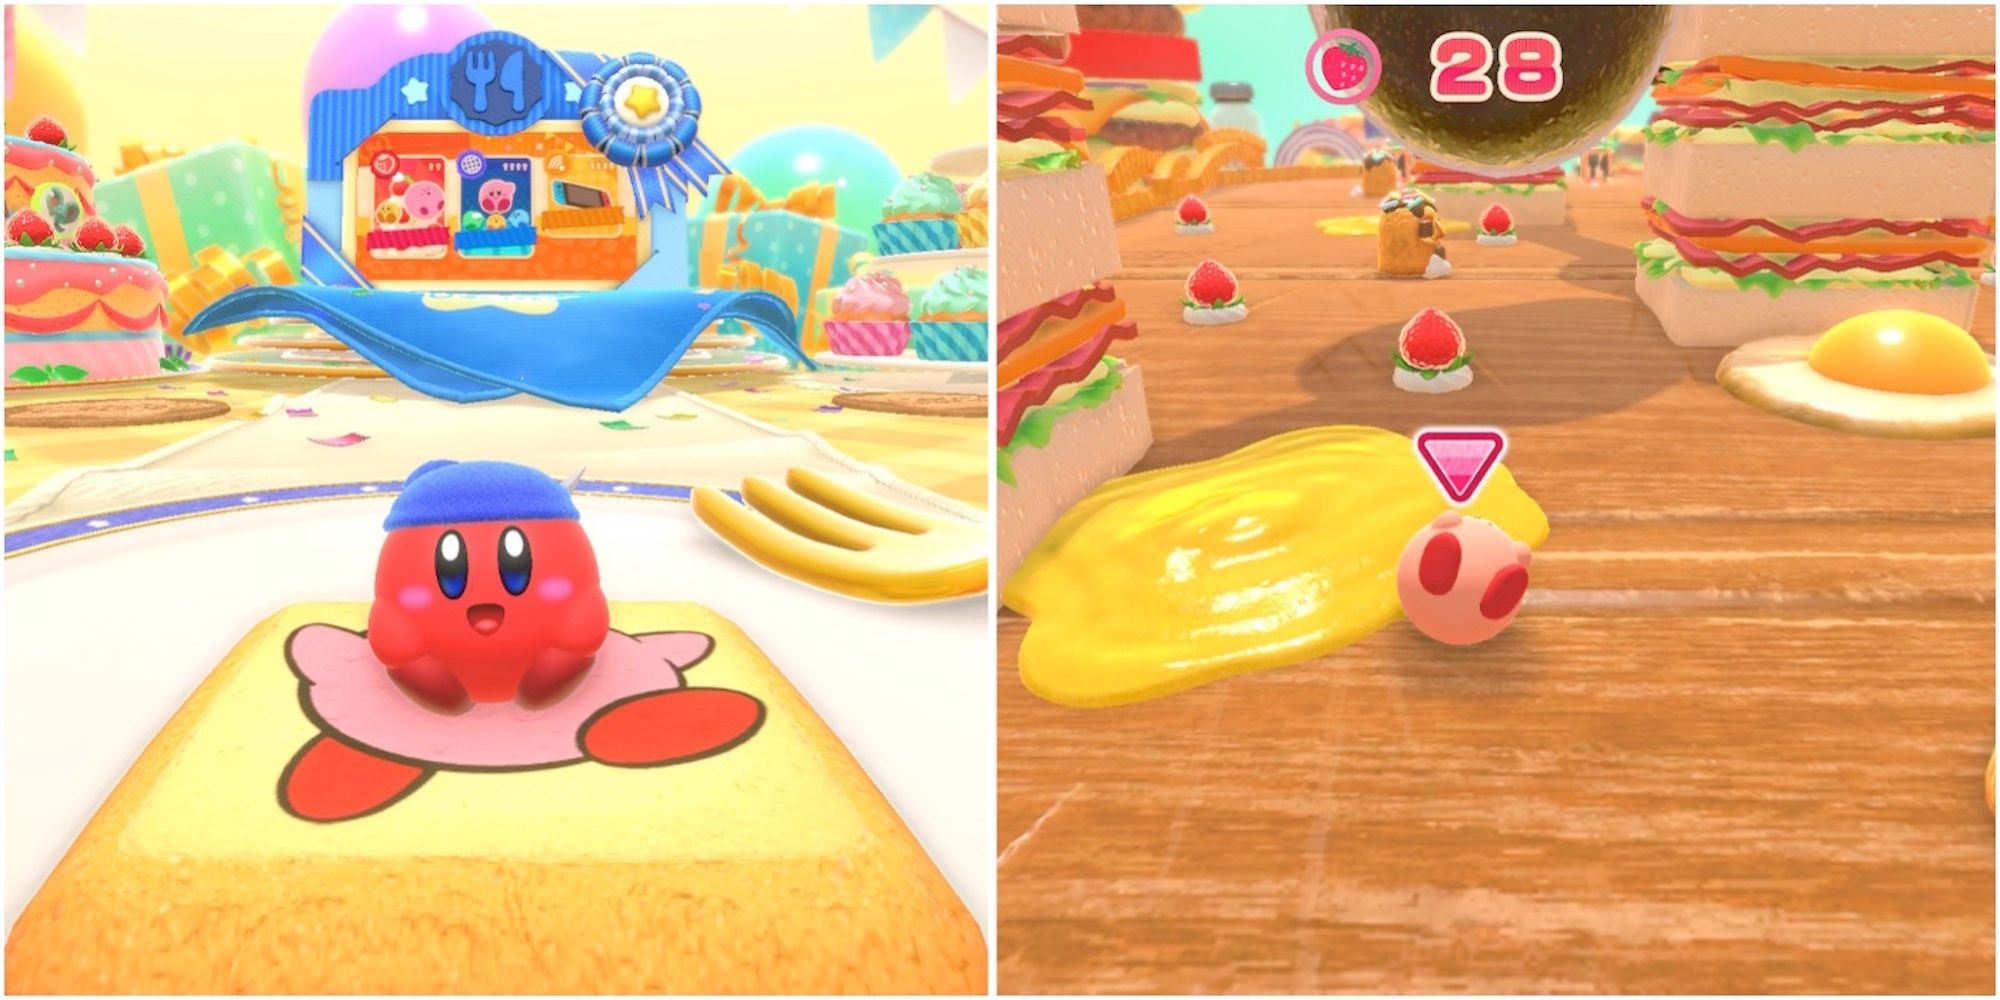 Kirby All You Can Eat  Kirby's Dream Buffet Animation 